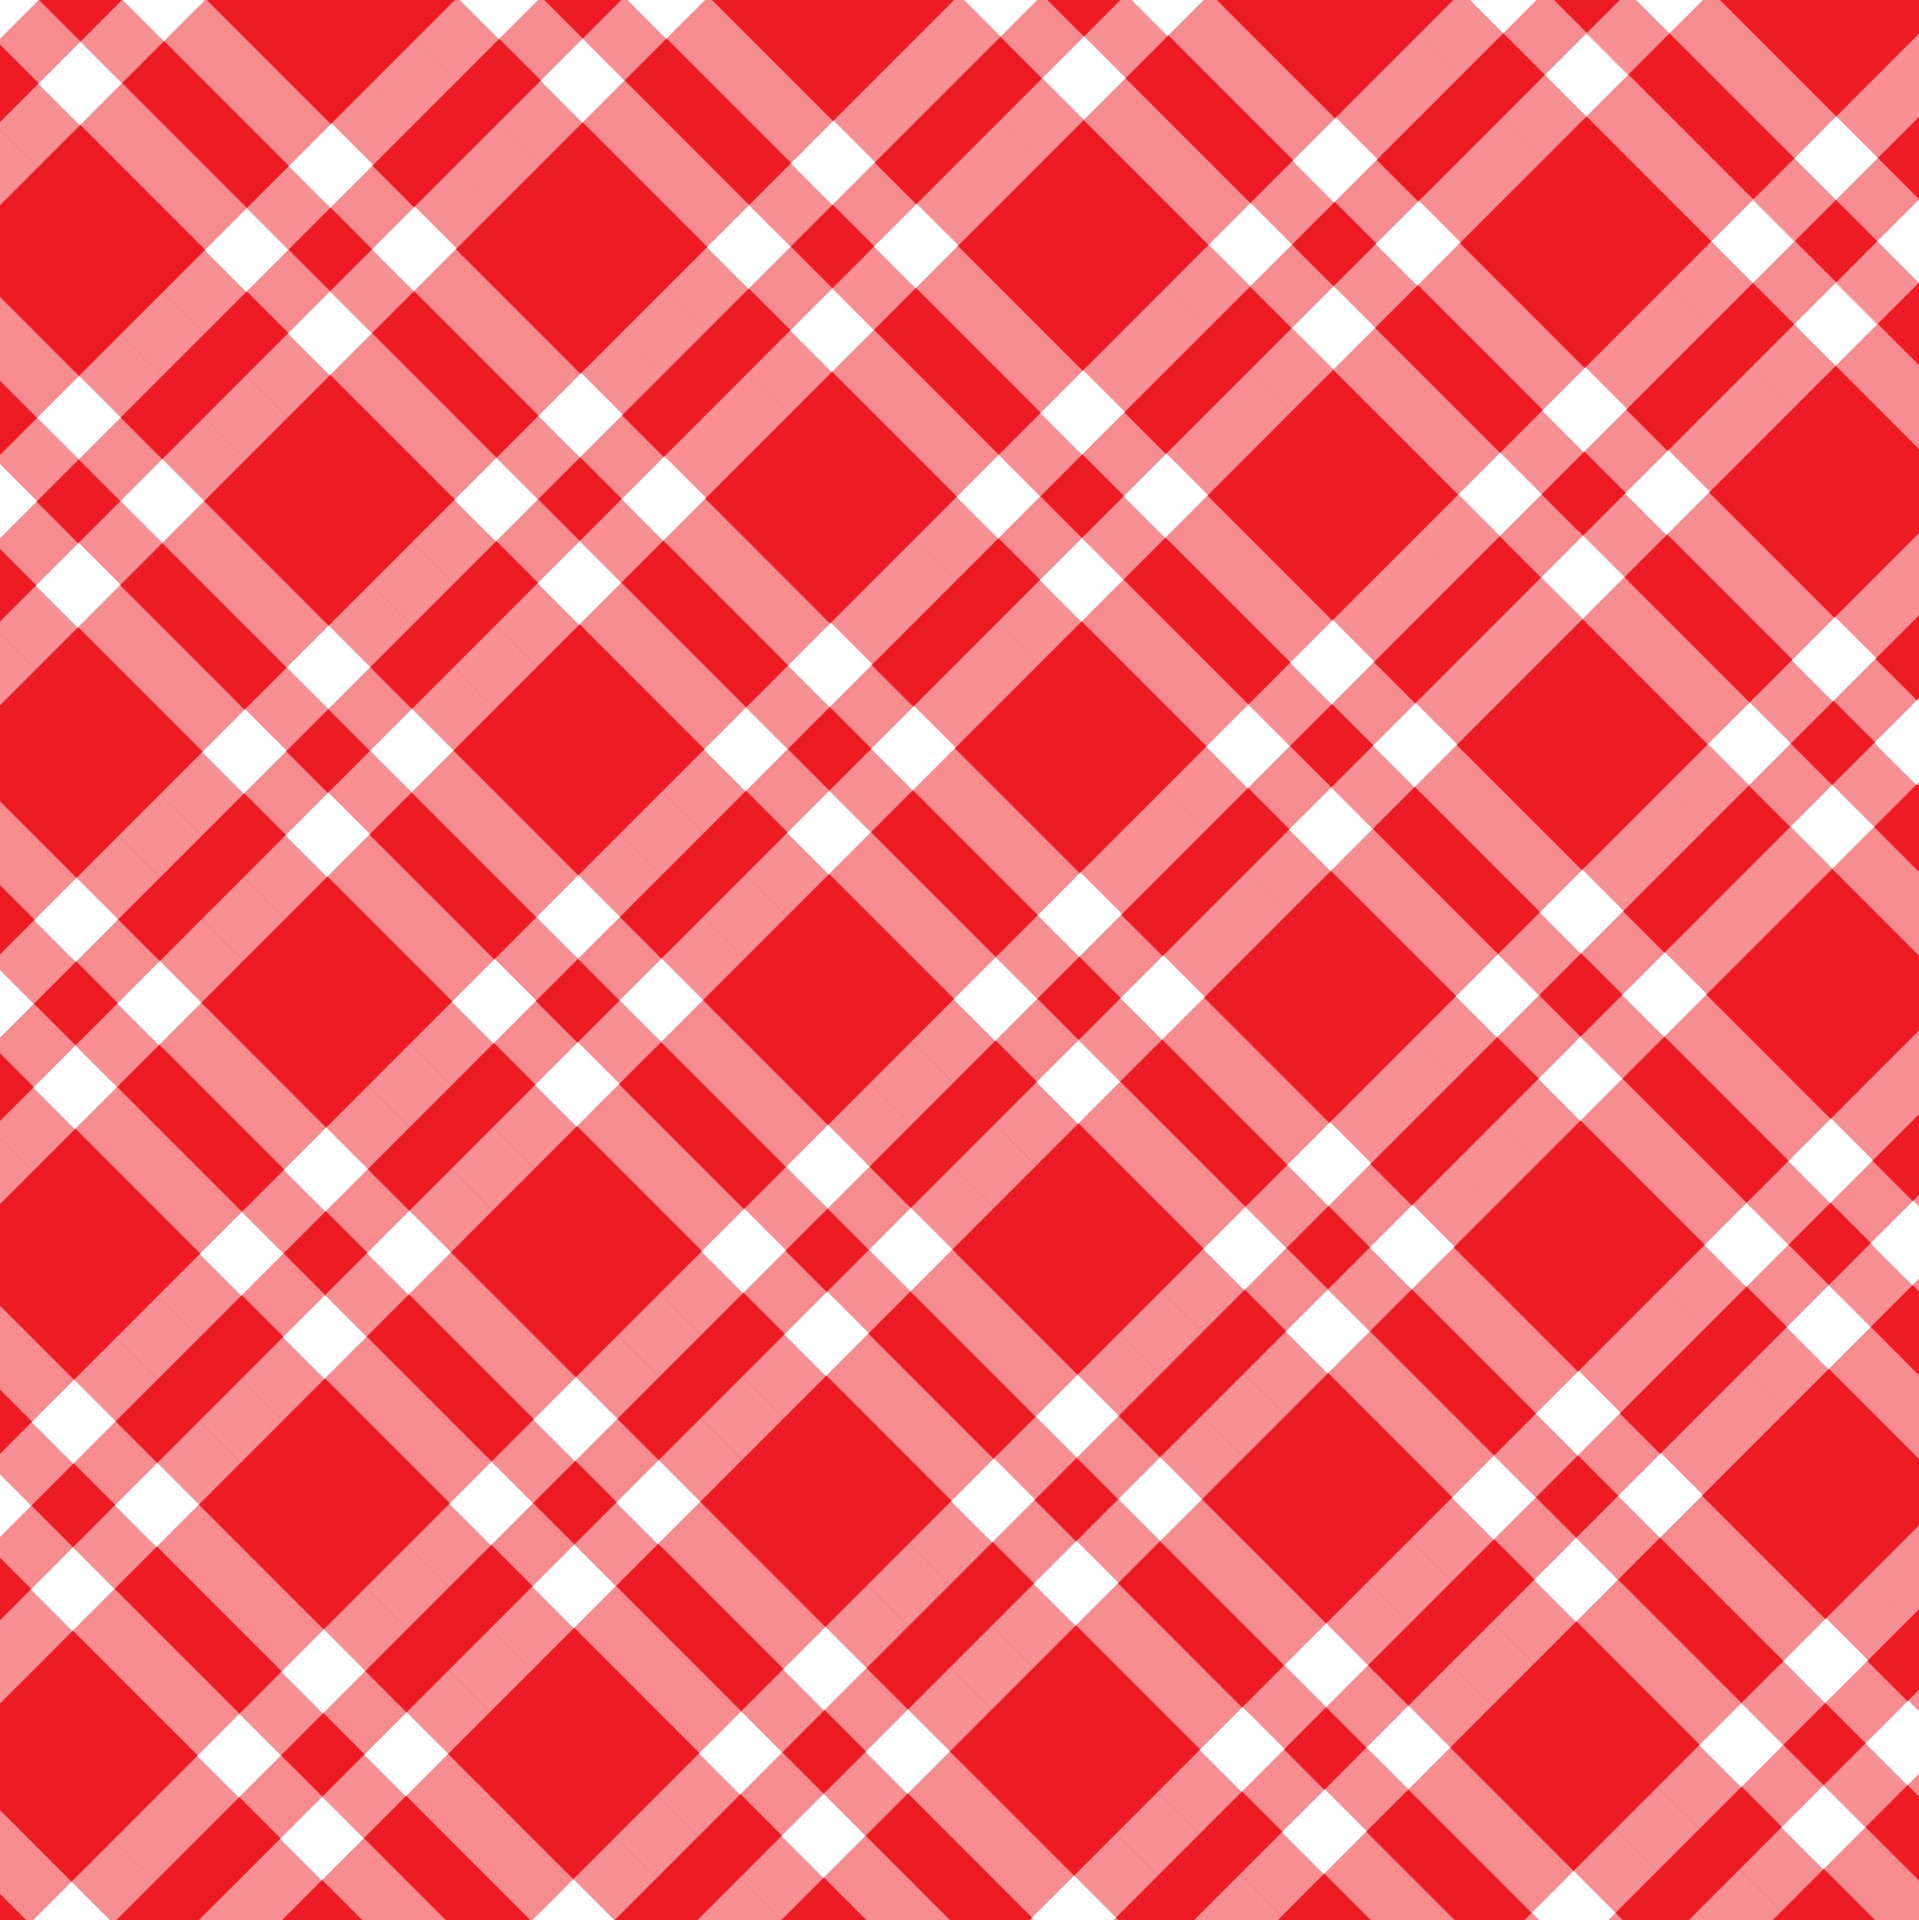 Red diagonal gingham checks pattern background for scrapbooking